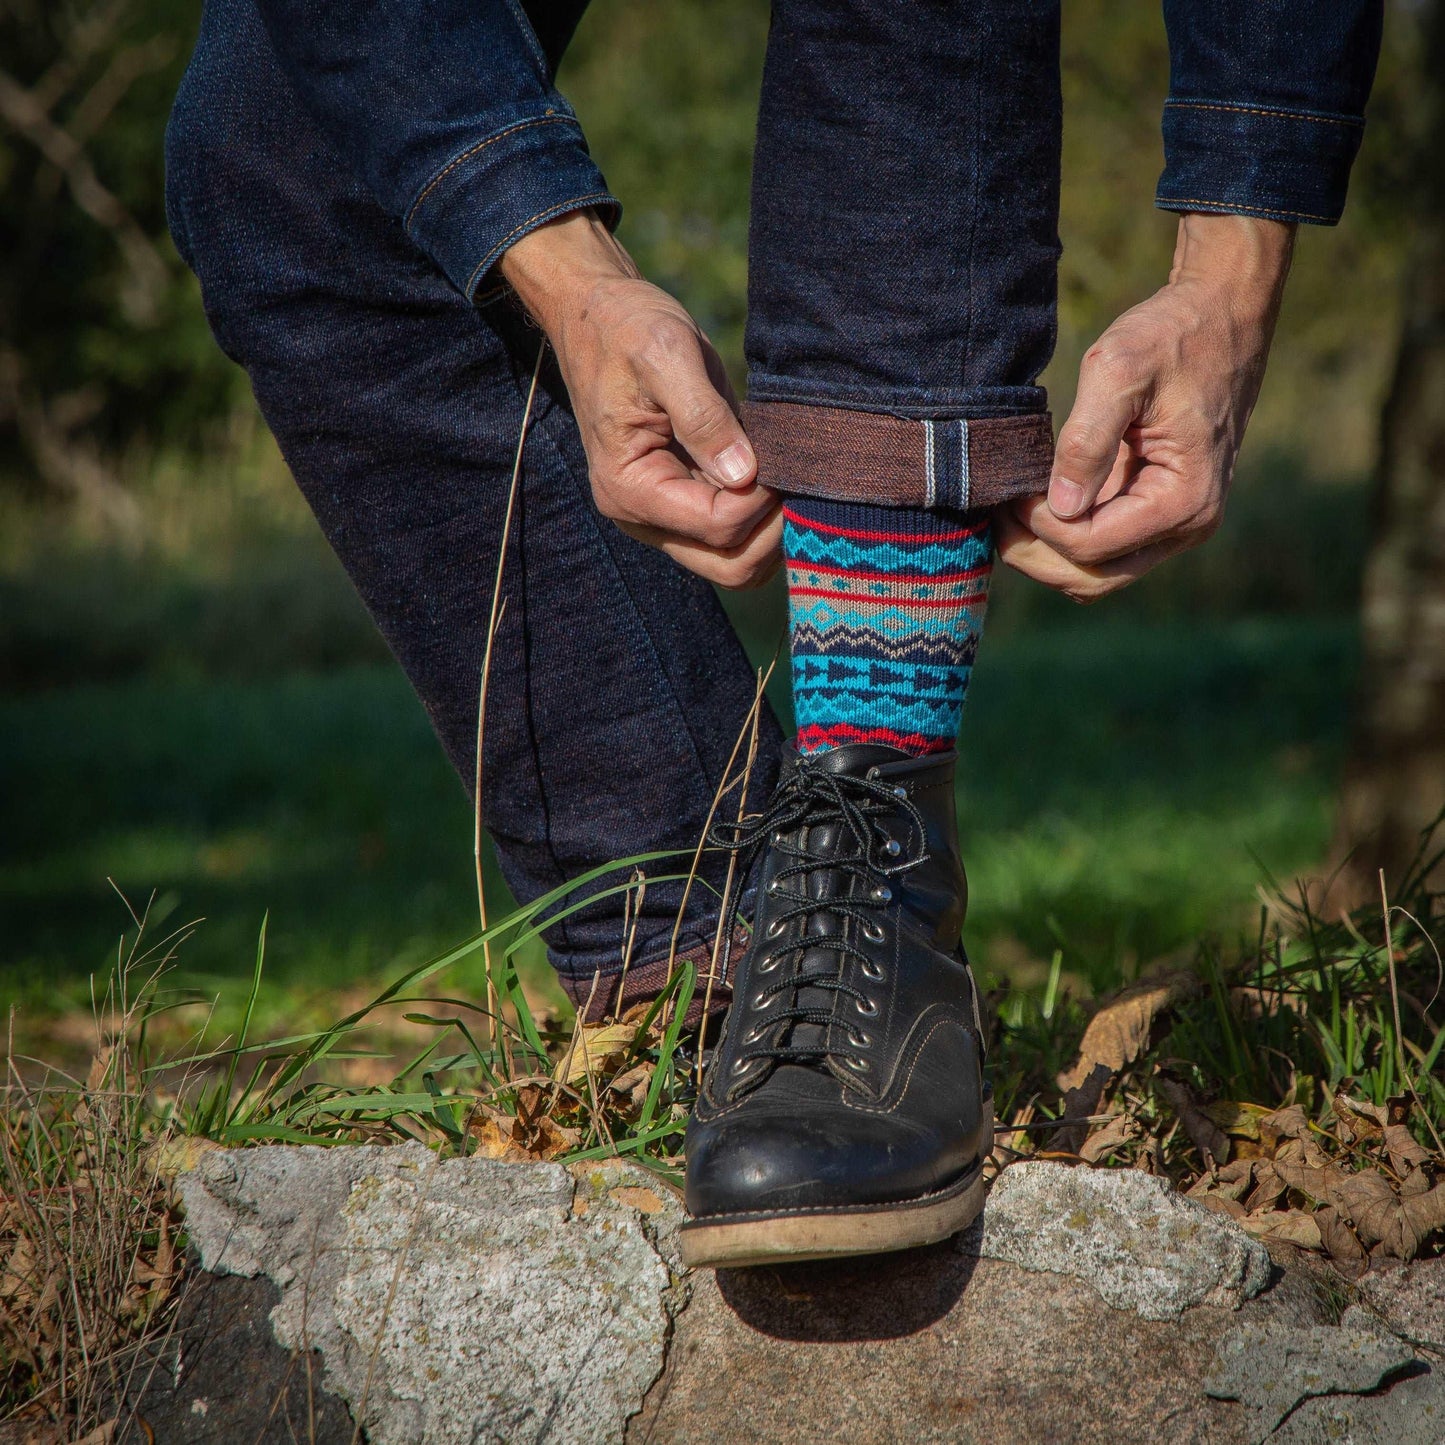 Redwing black boots with triangle and stripe pattern navy socks